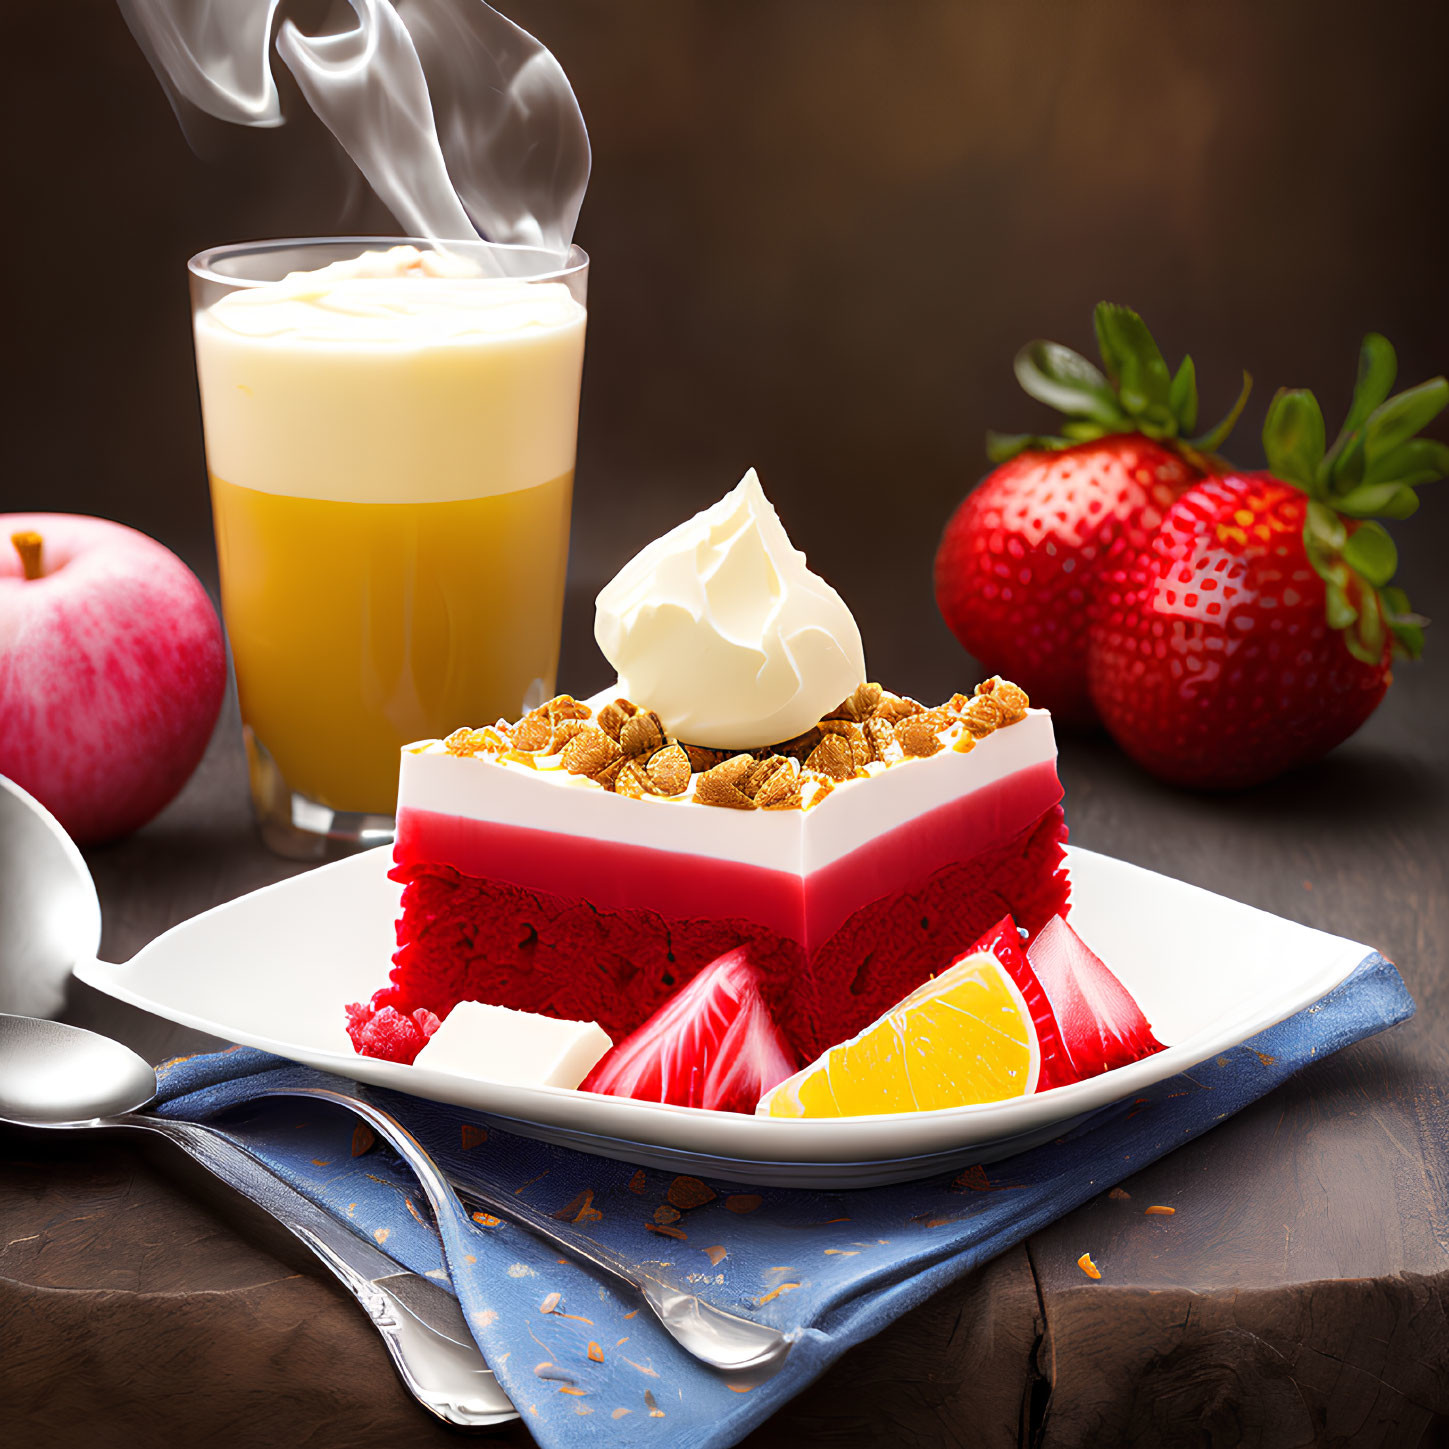 Colorful Sponge Cake with Cereal, Cream, Fruit, and Juice on Wooden Table